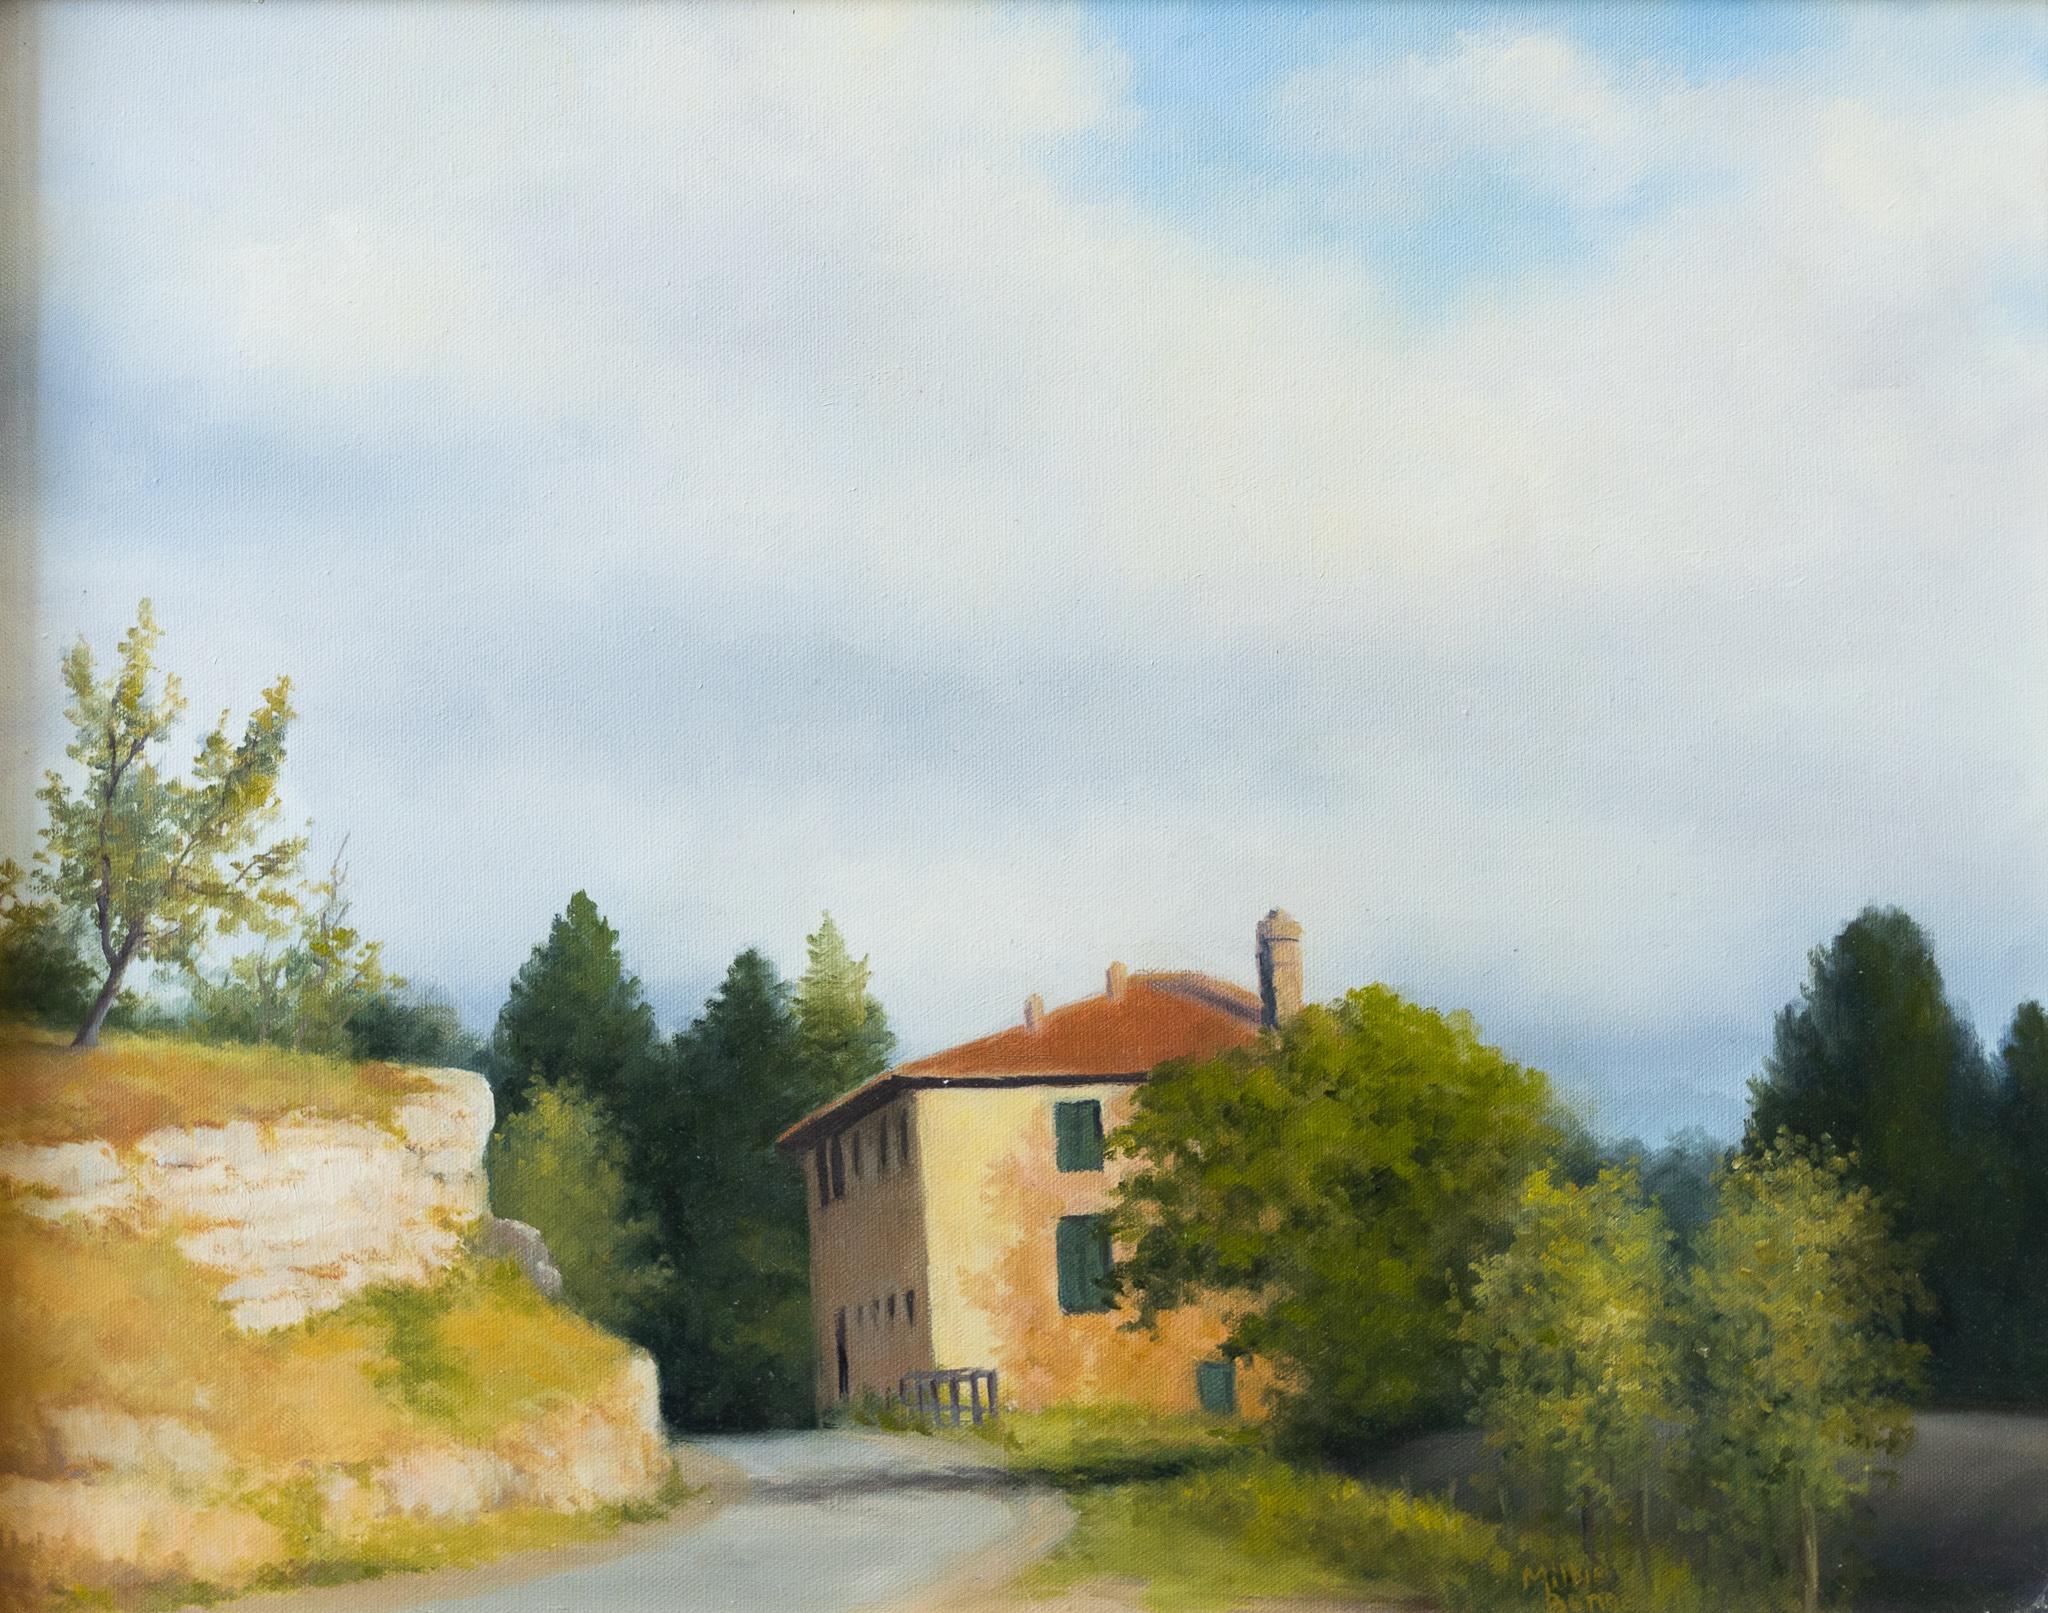 Villa in Tuscany - Painting by Milbie Benge